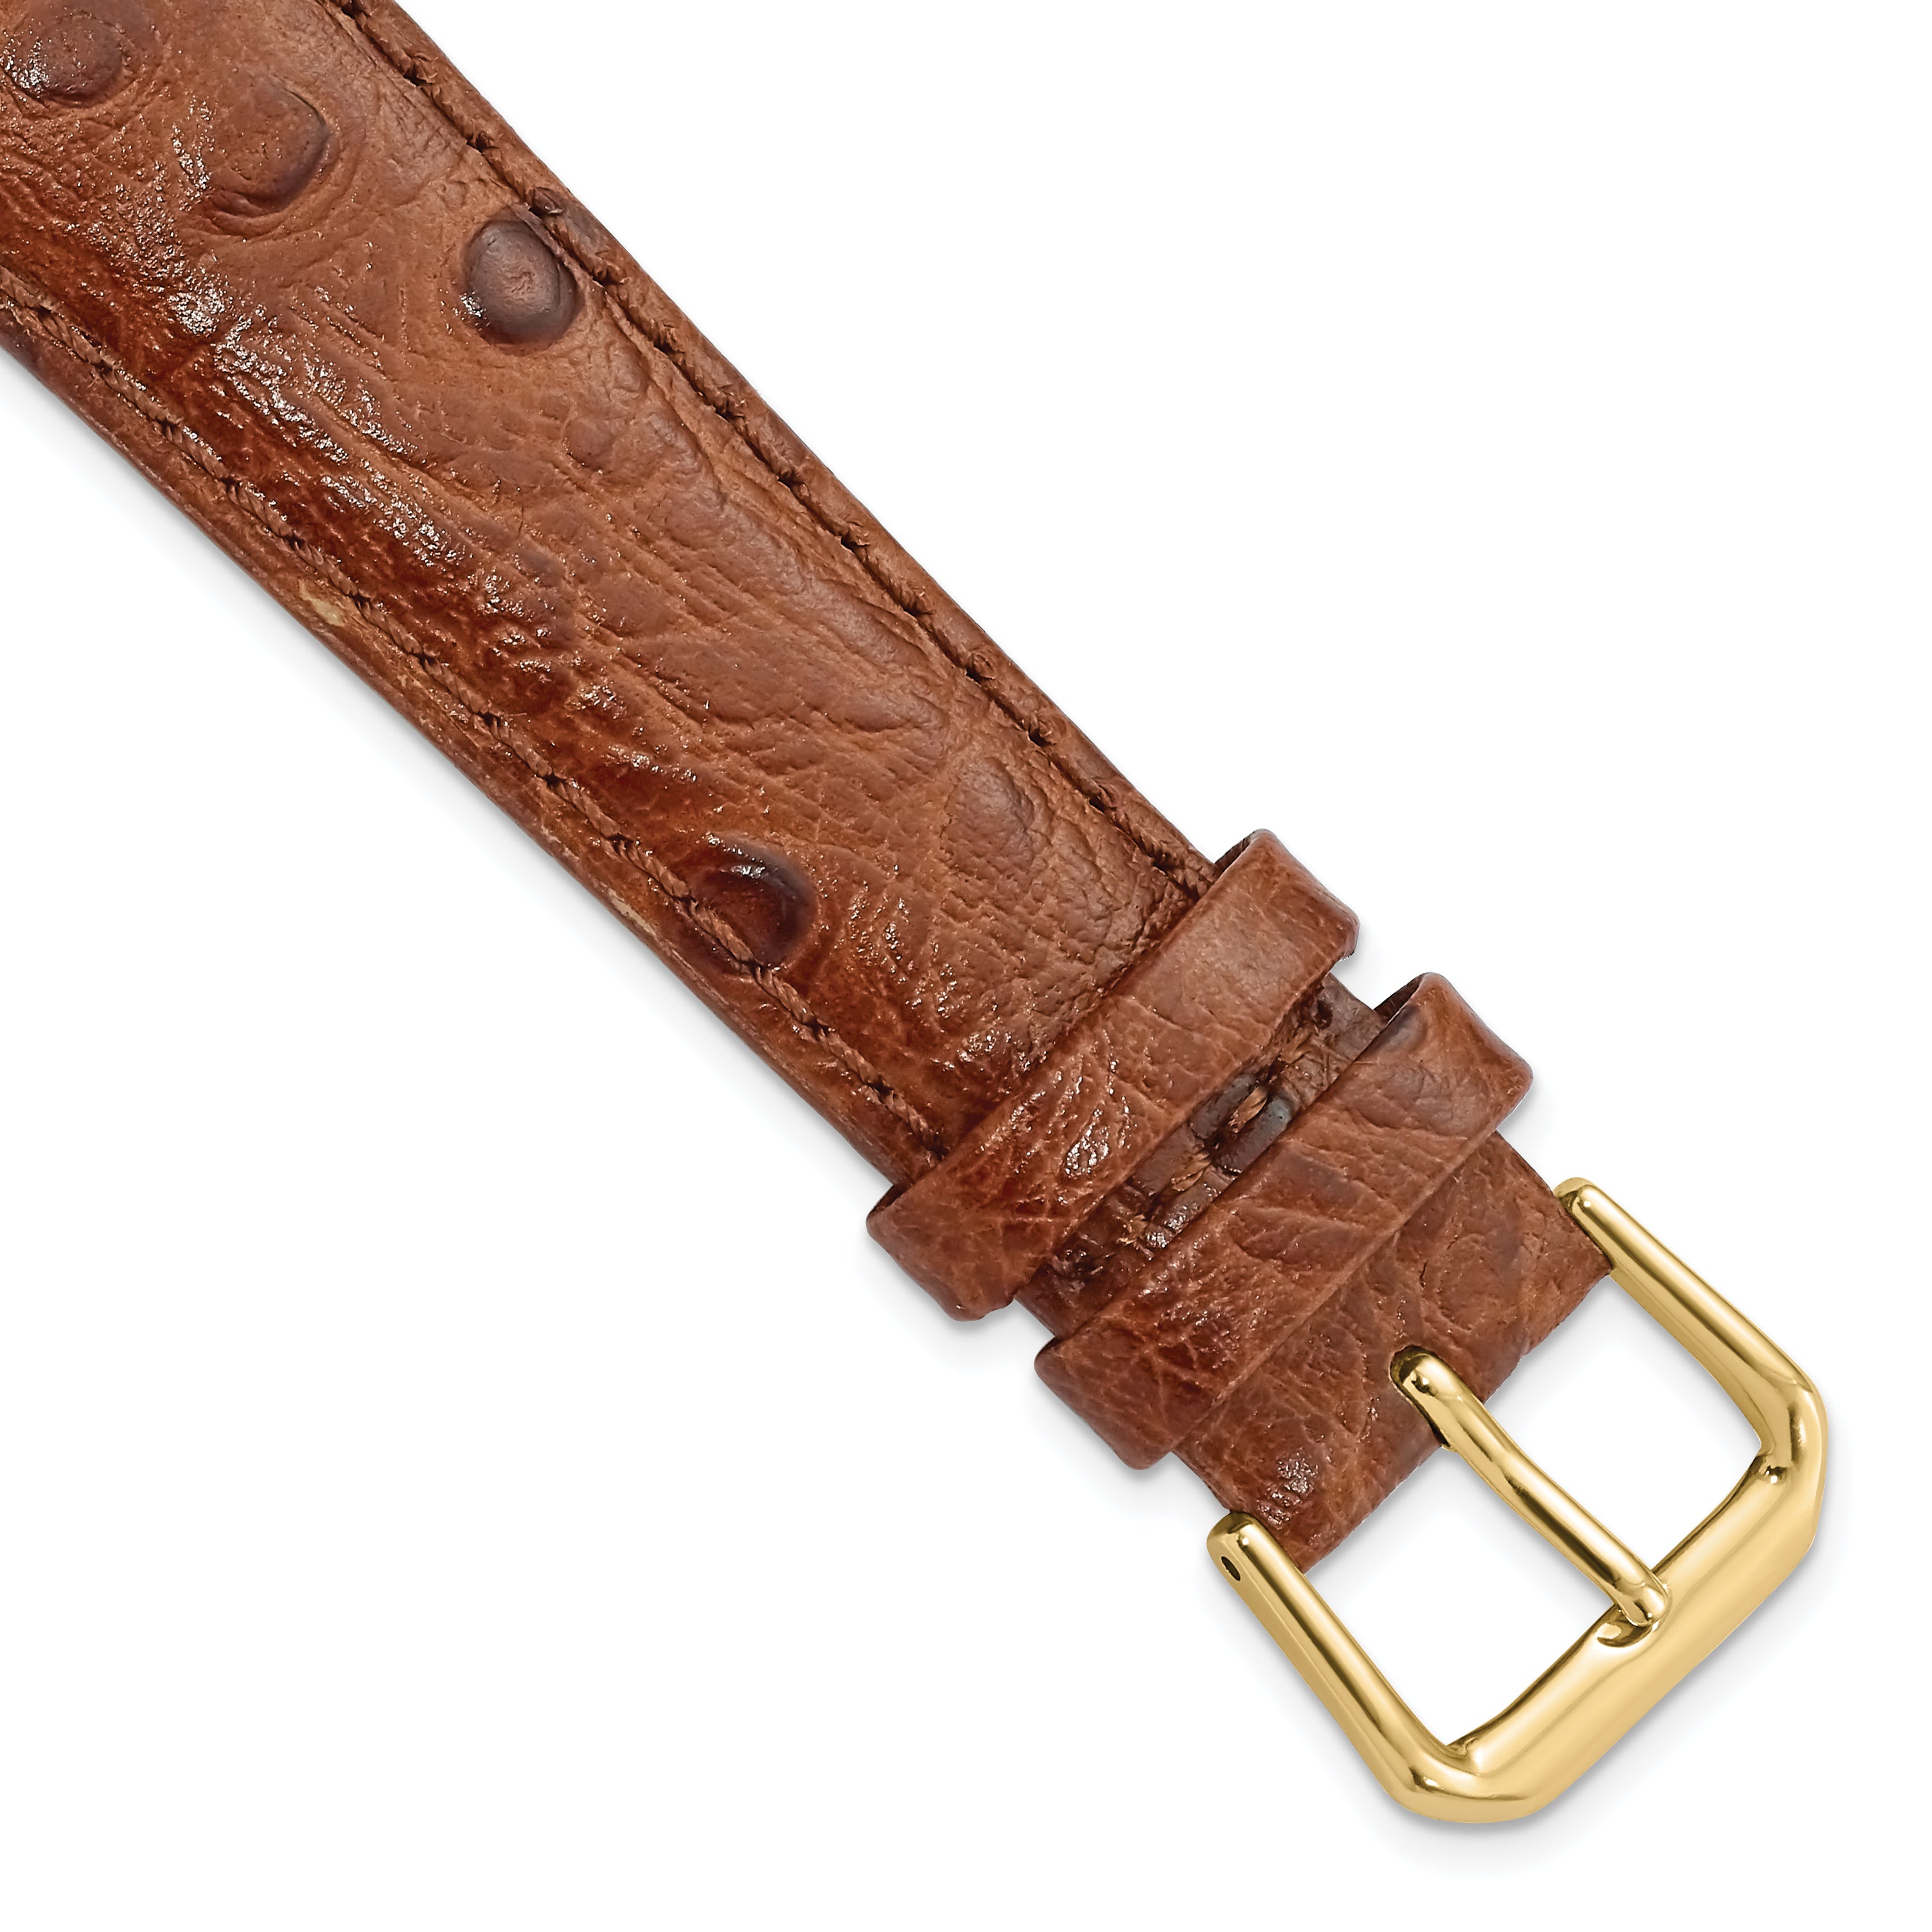 DeBeer 19mm Havana Ostrich Grain Leather with Gold-tone Buckle 7.5 inch Watch Band